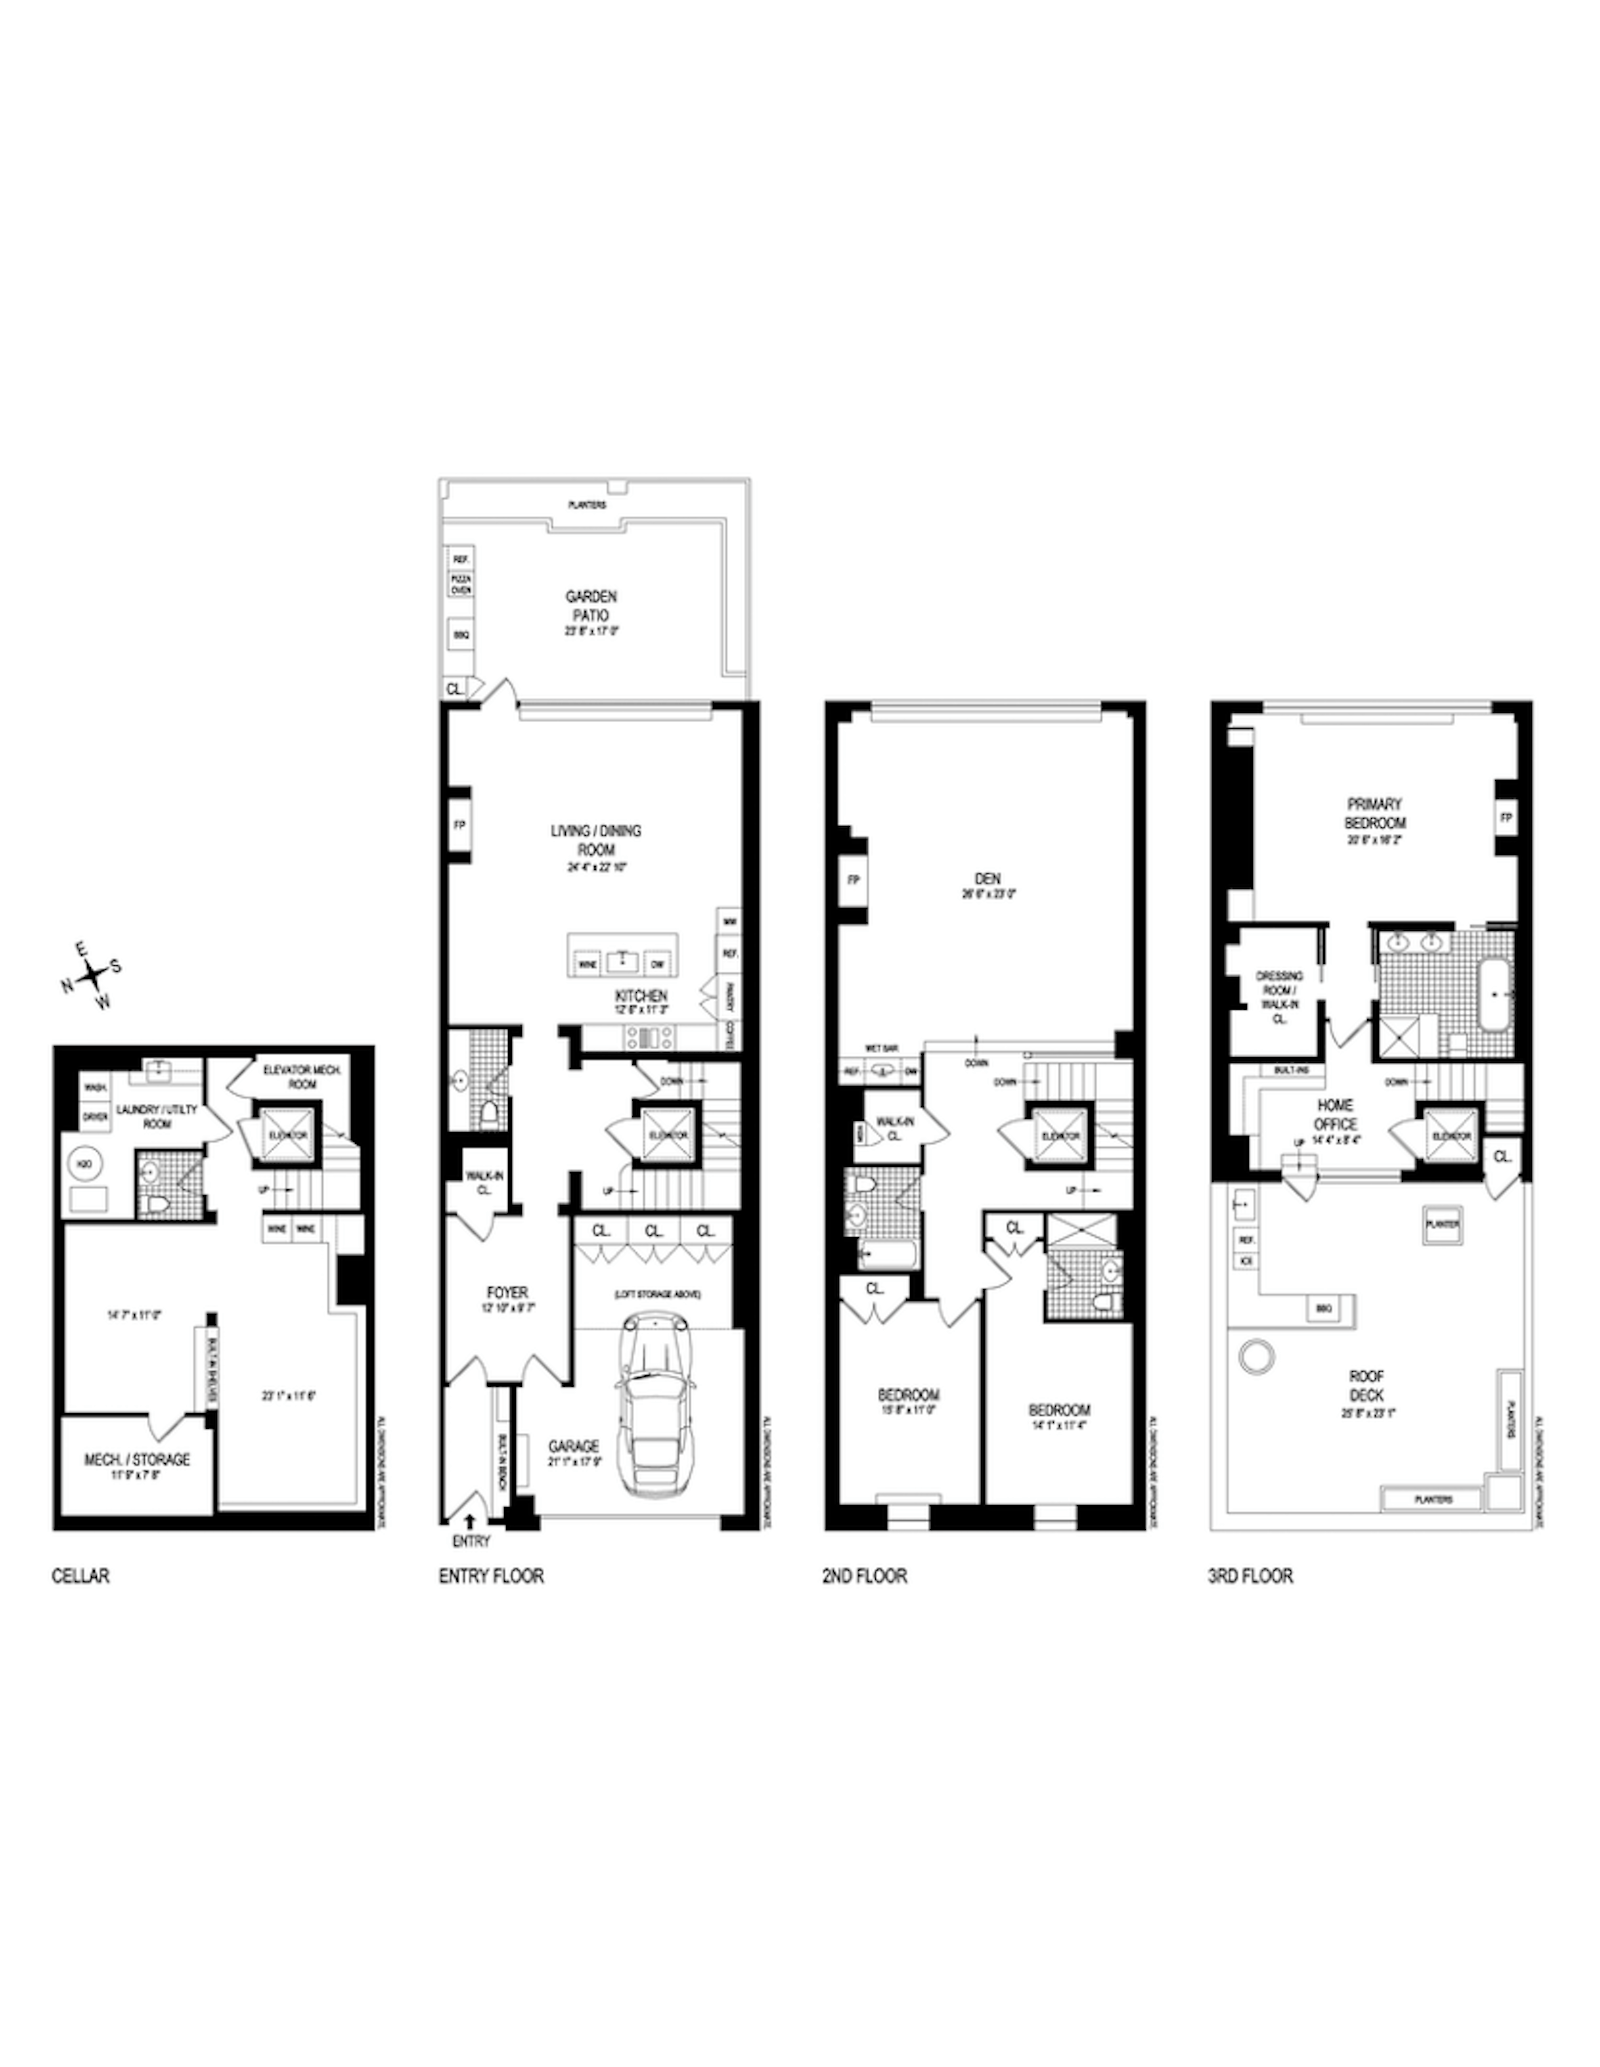 Floorplan for 12 College Place